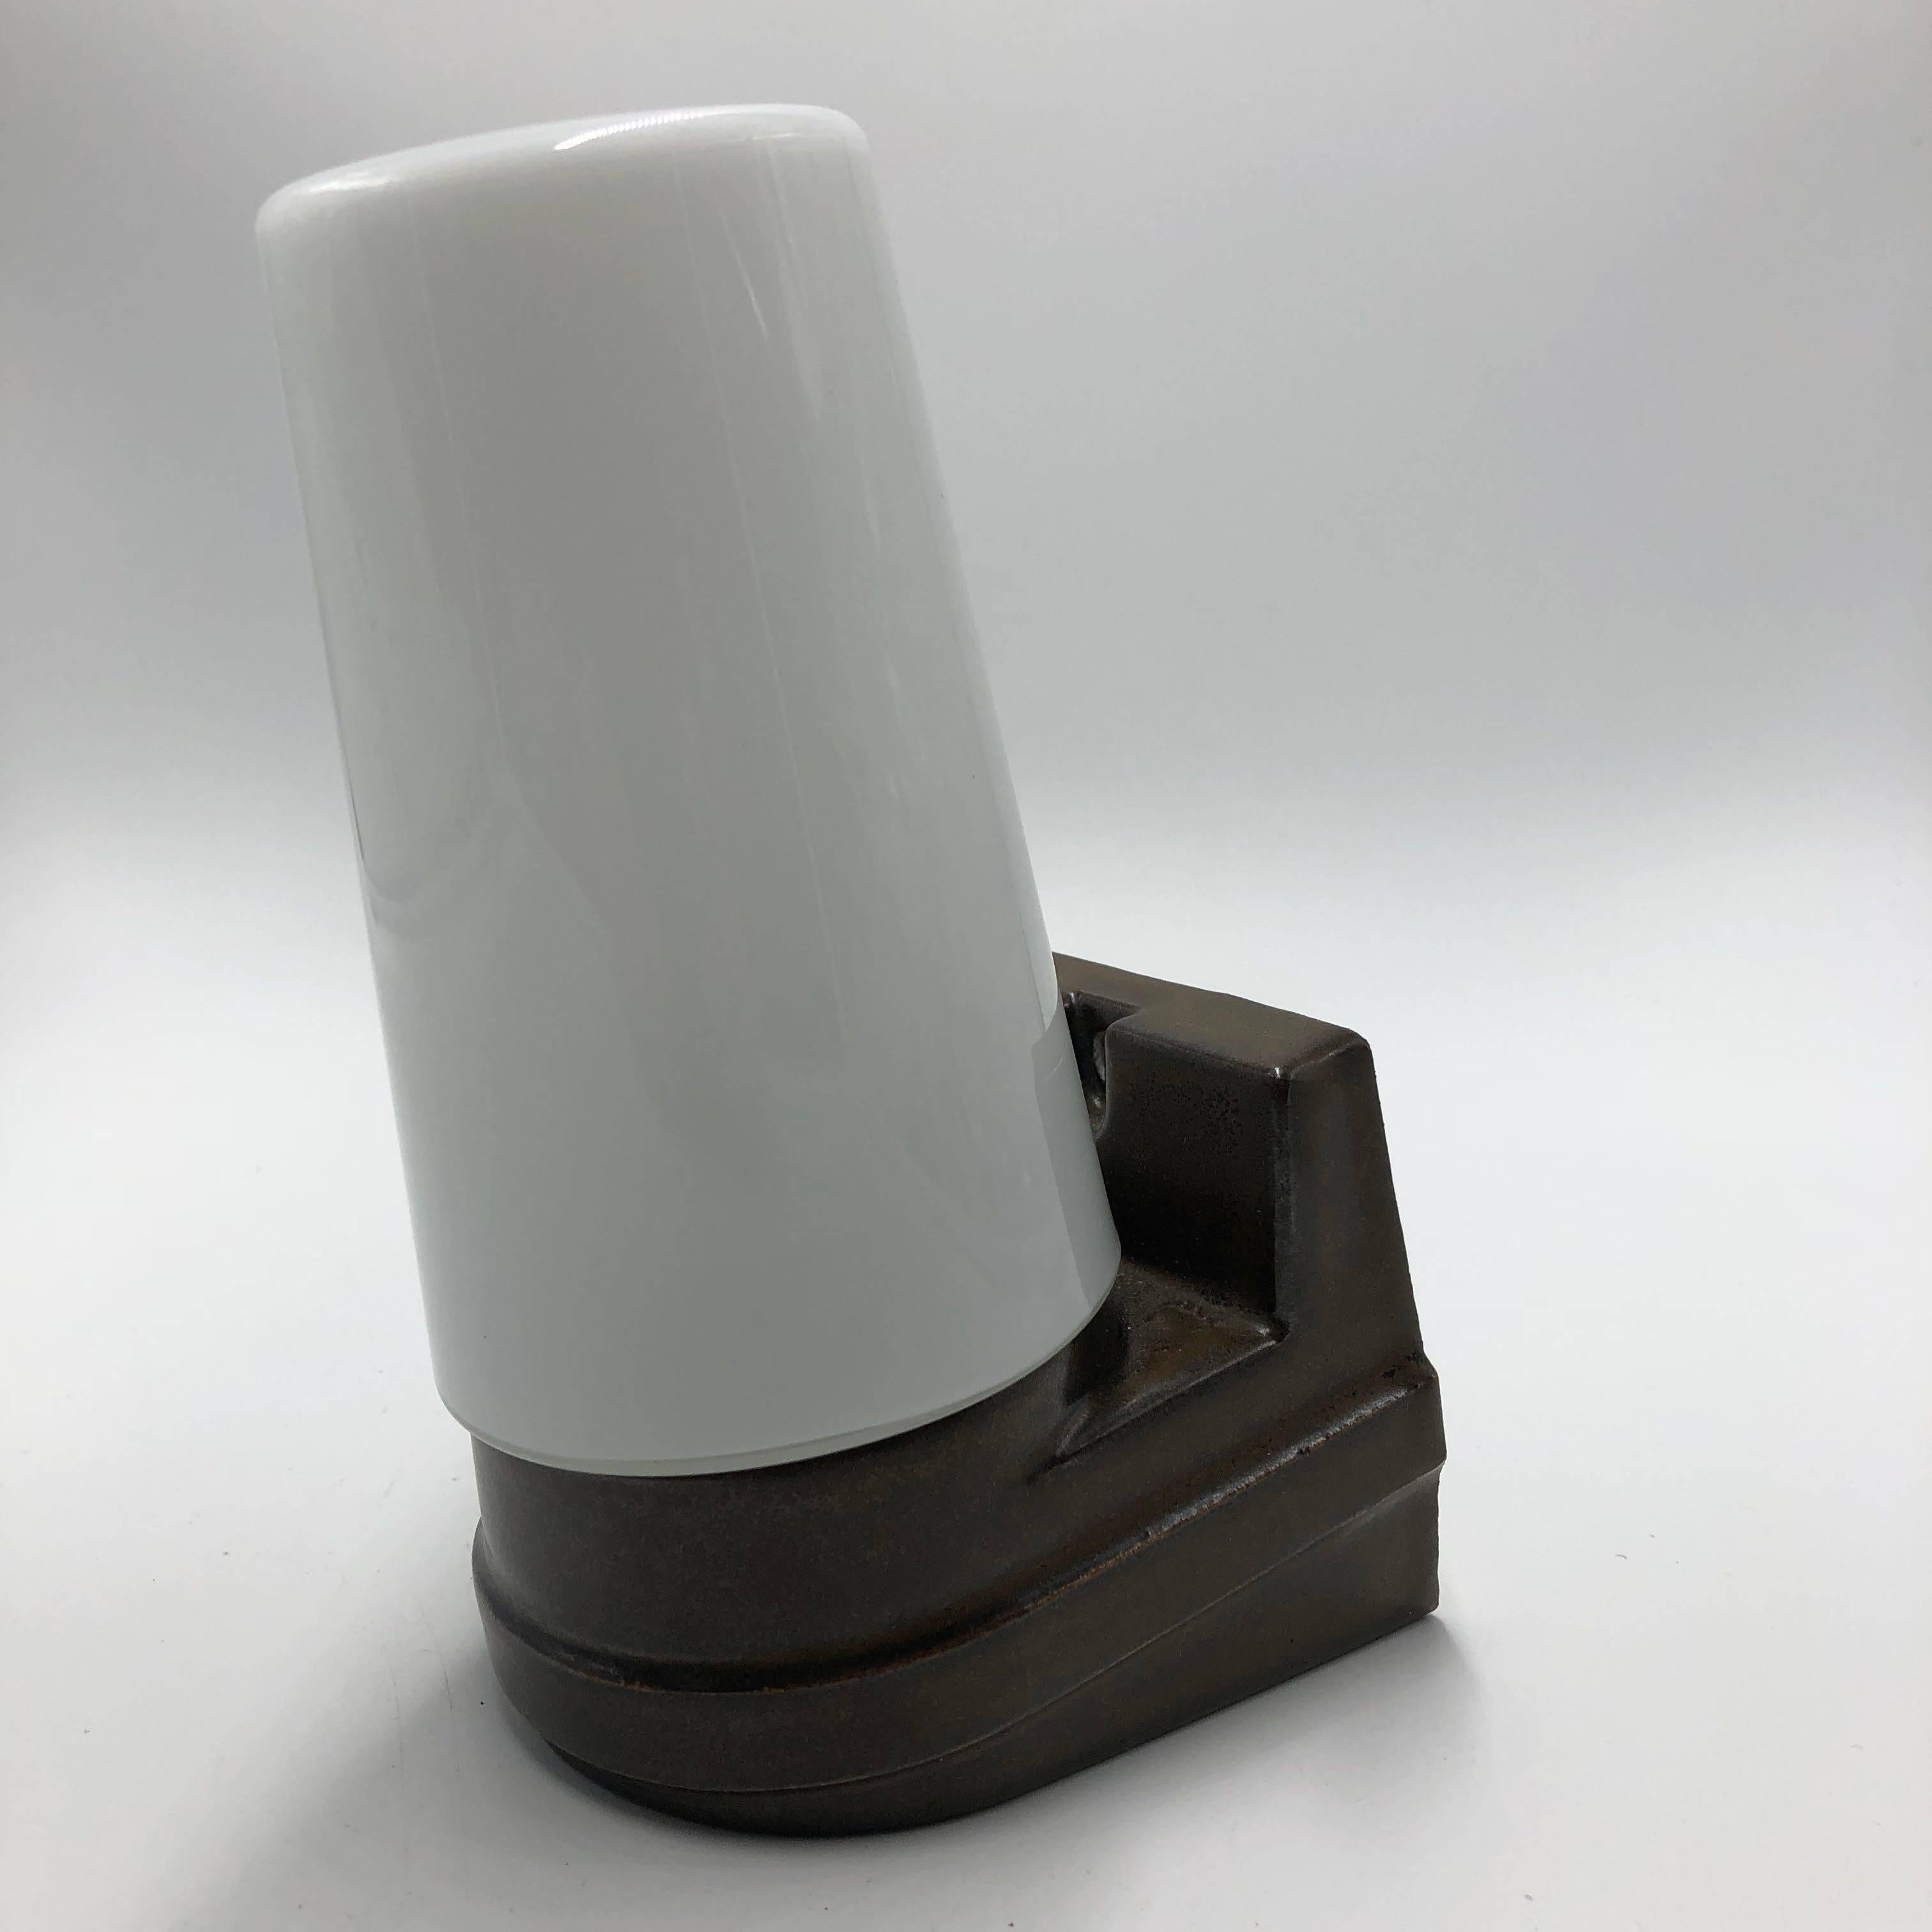 Brown ceramic with white glass bathroom lamp by Ifö, Sweden.
Designed by Sigvard Bernadotte in the 1960s.
In good working condition. No cracks, or missing pieces.
E27 lamp sockets.
 